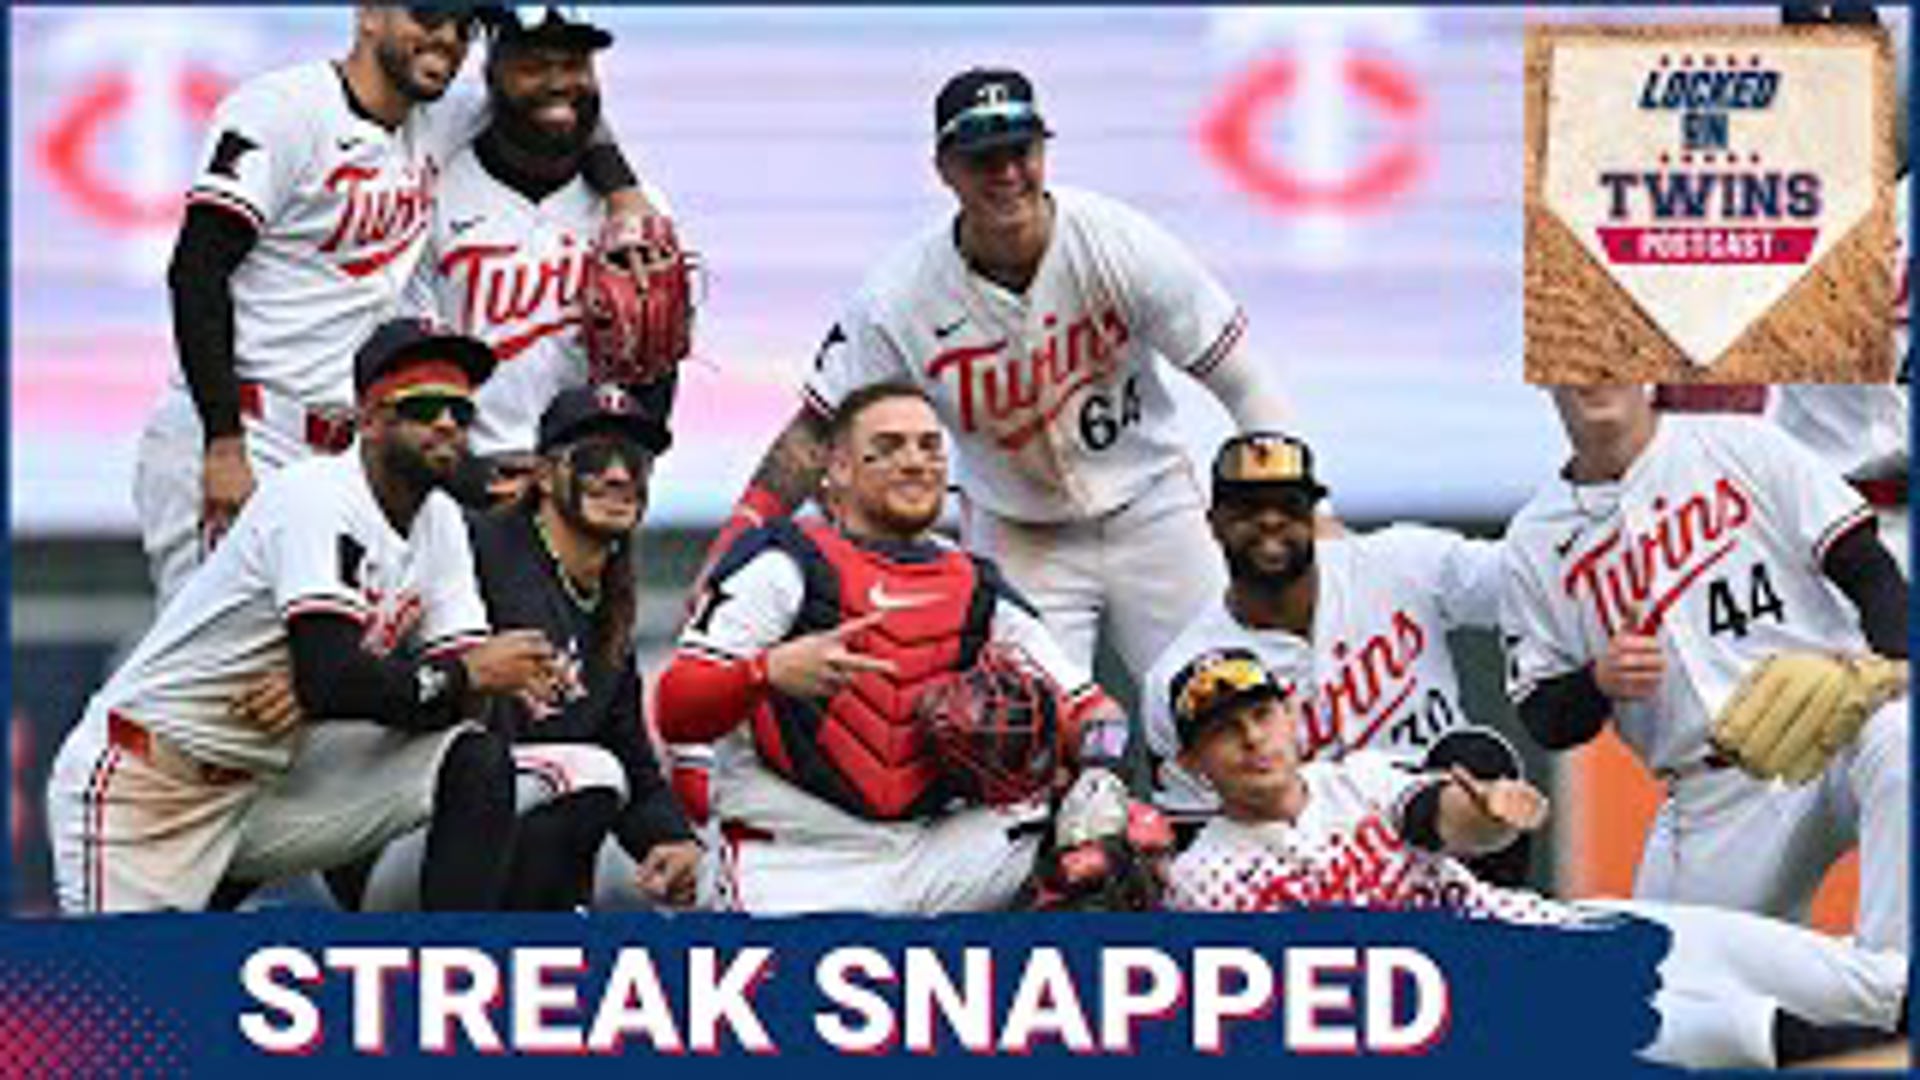 The Minnesota Twins streak is officially snapped. Join Luke Inman and Theo Tollefson for the instant reaction and breakdown following the game.